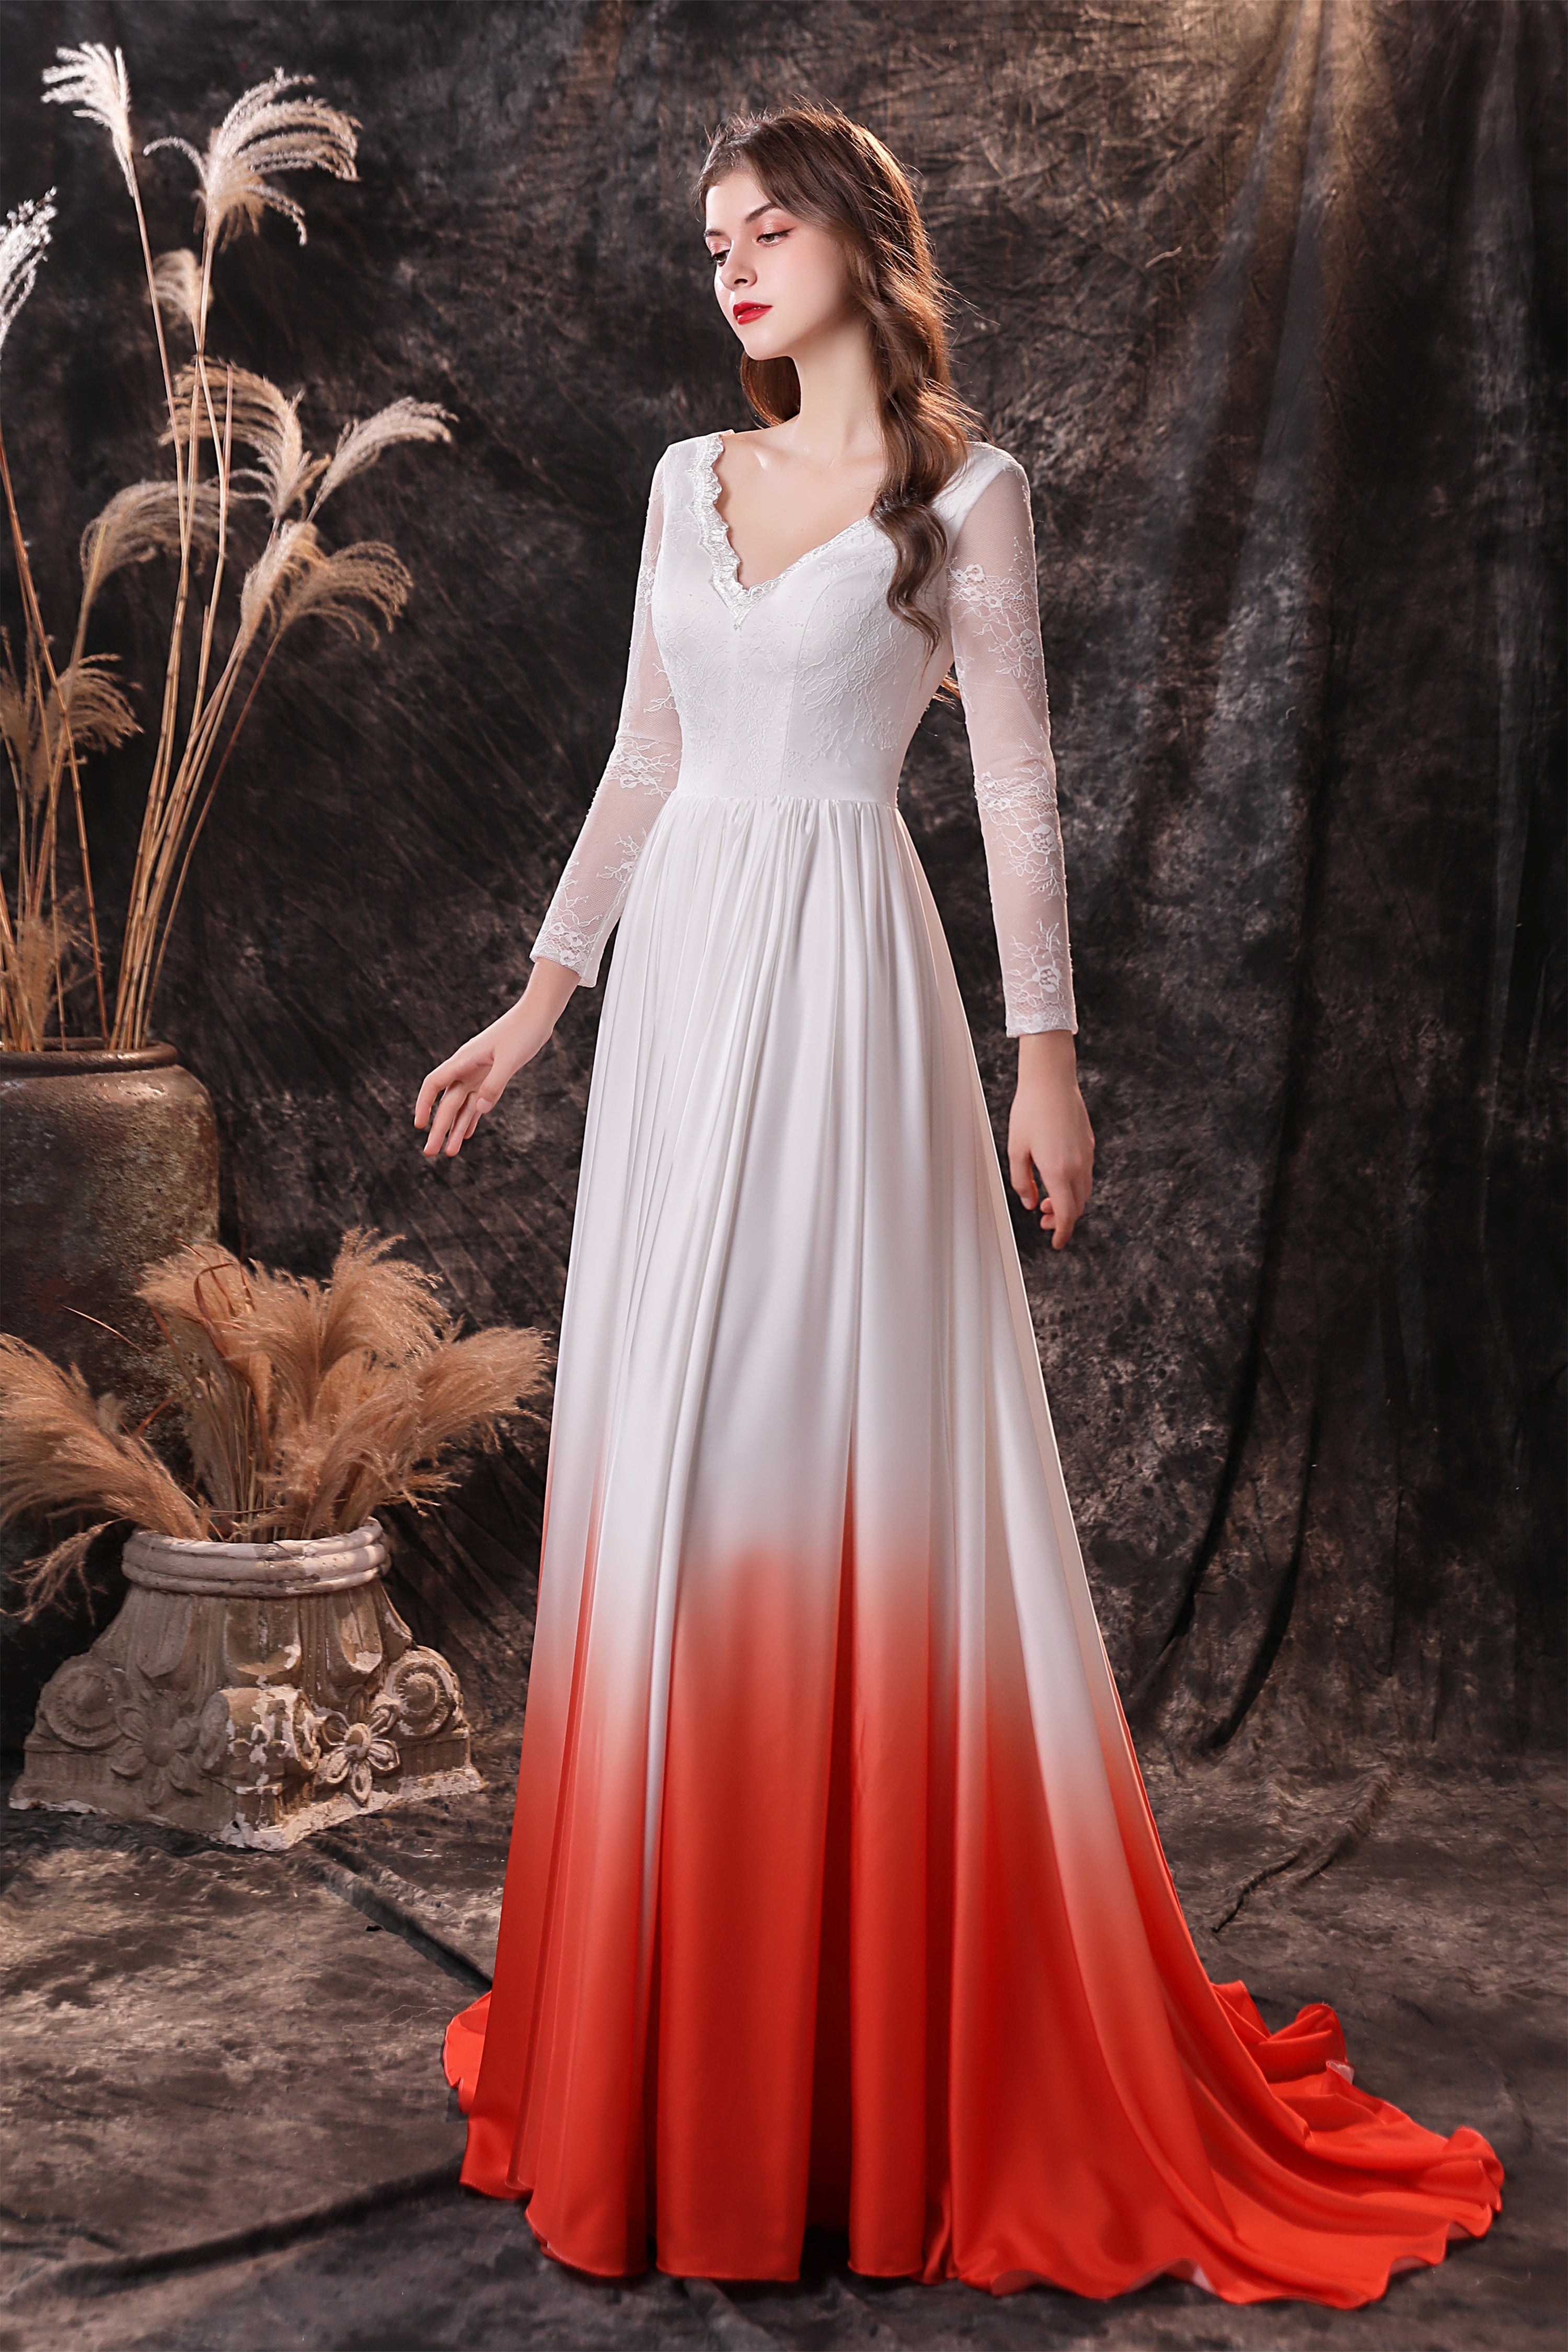 Party Dress Ladies, A Line V-Neck Long Sleeve Ombre Silk Like Satin Sweep Train Prom Dresses